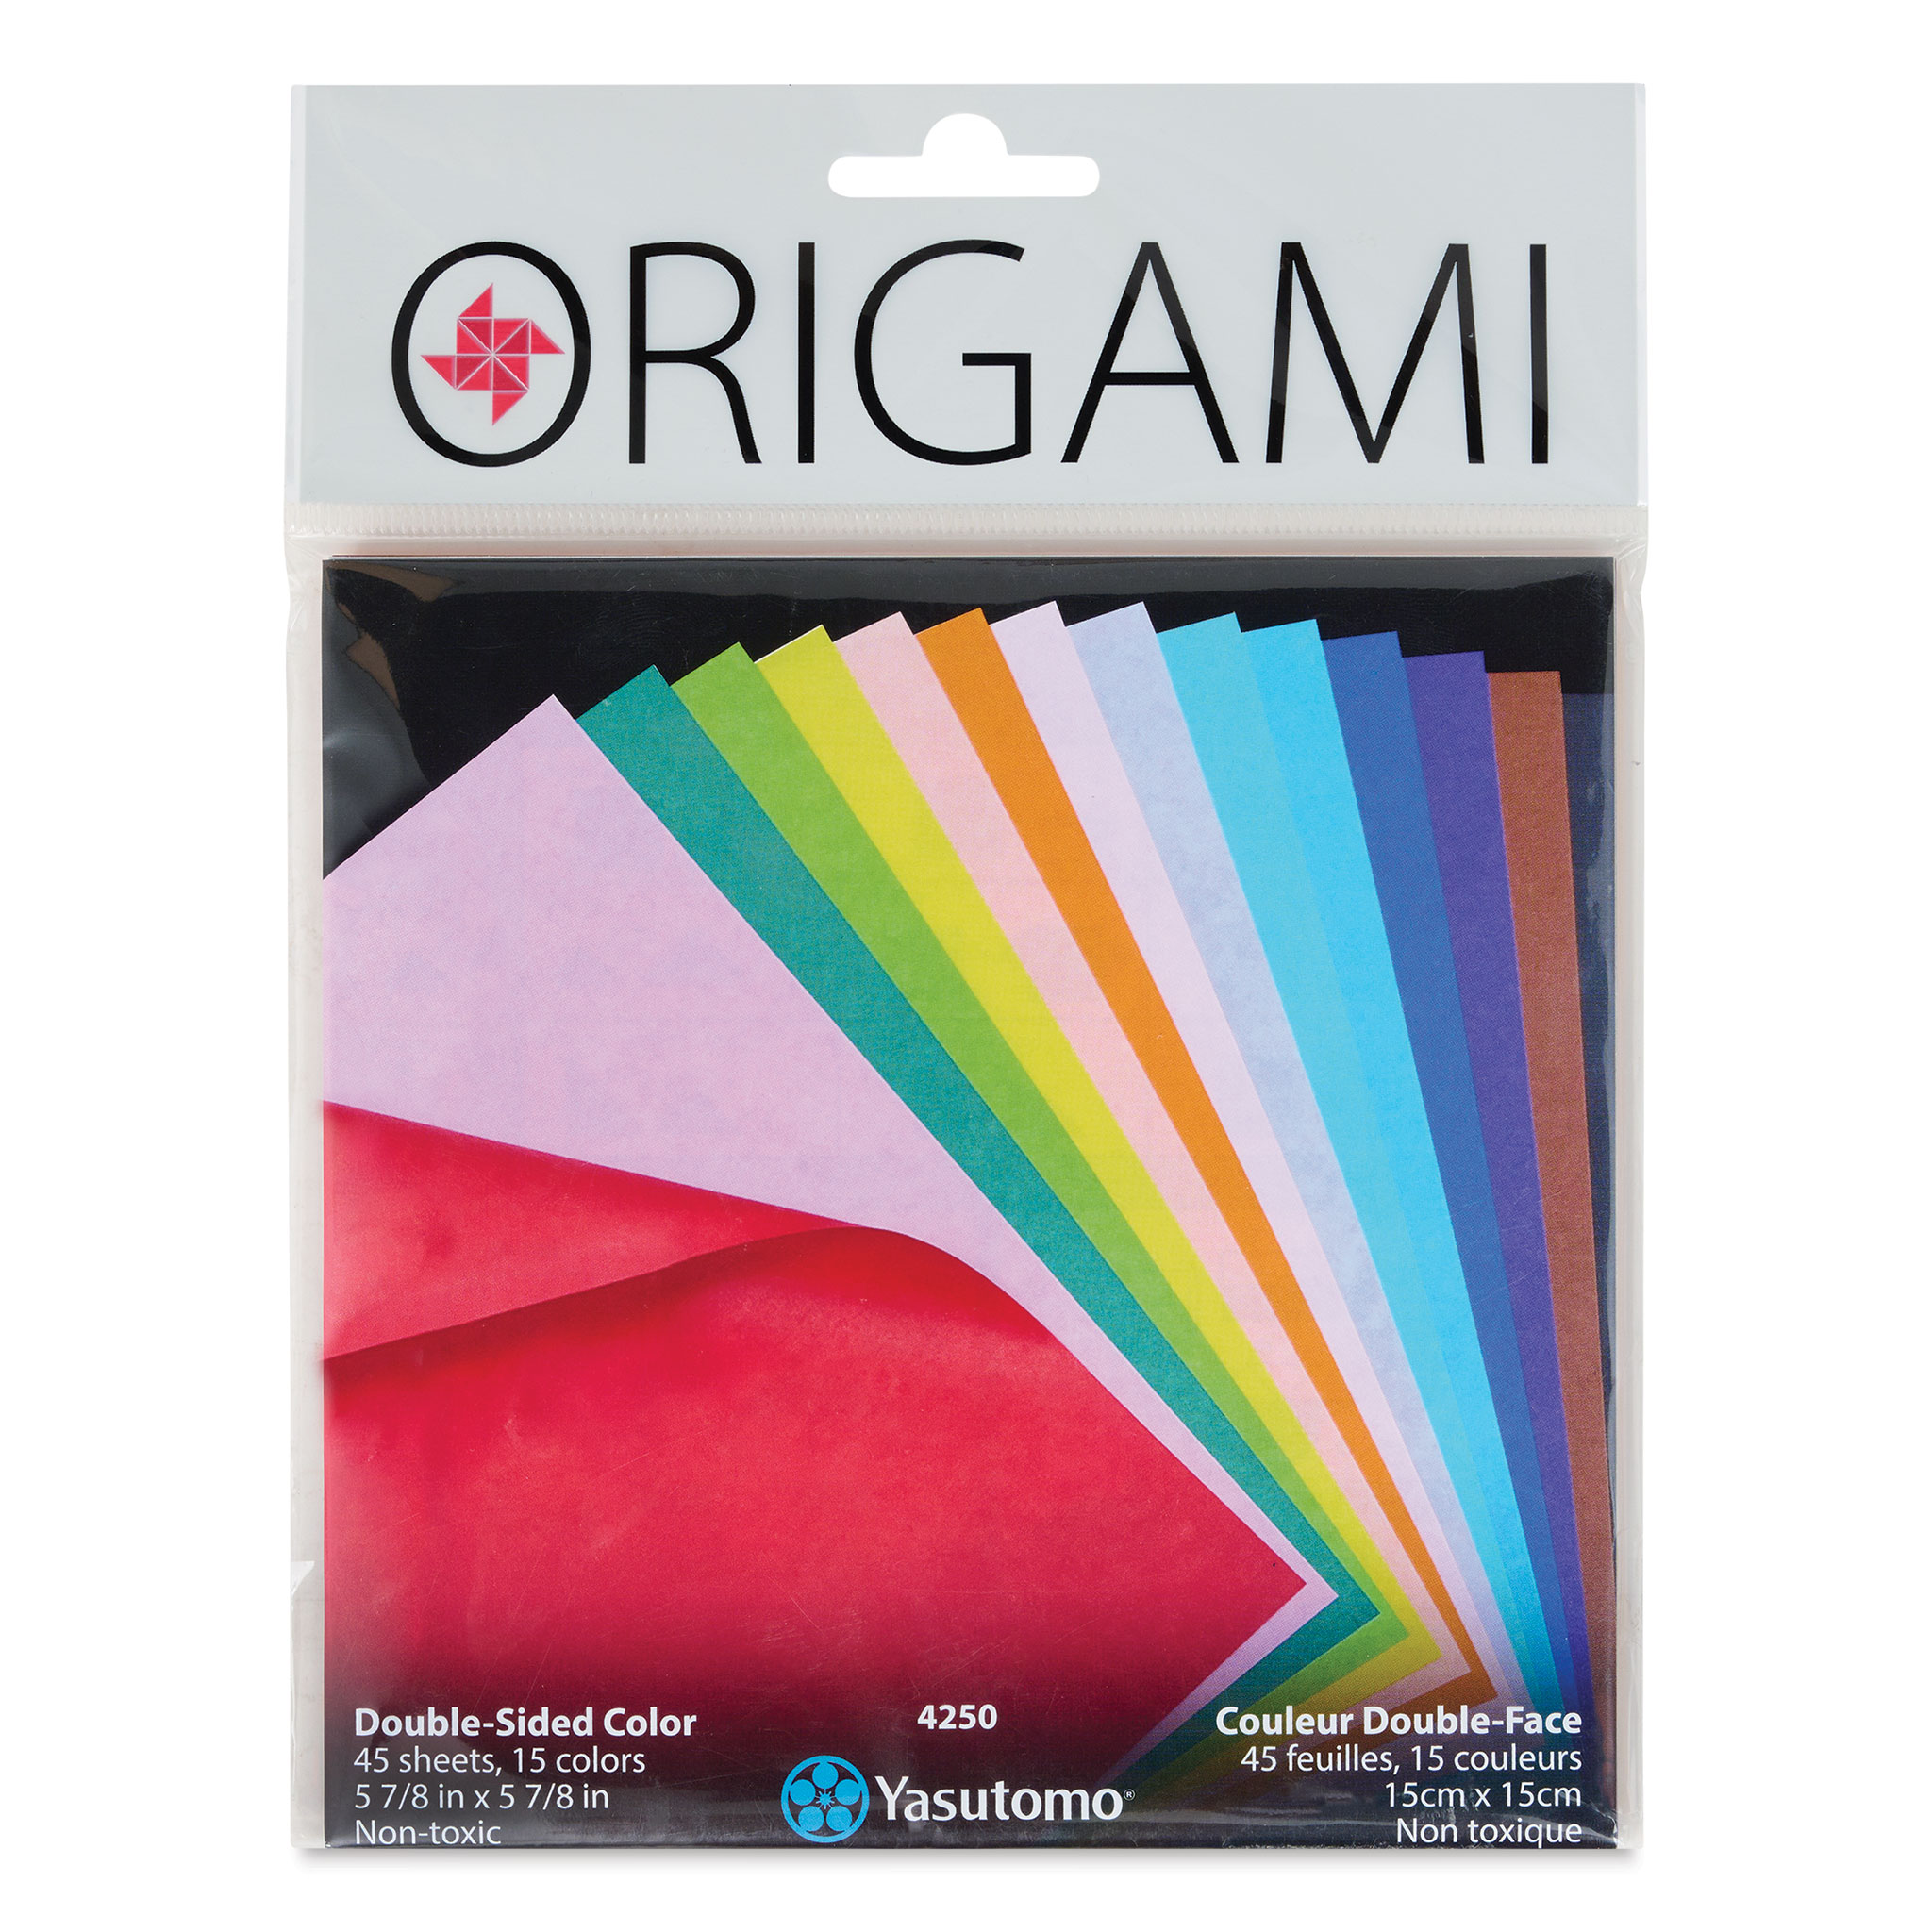 Wholesale 8x8 origami paper To Turn Your Imagination Into Reality 